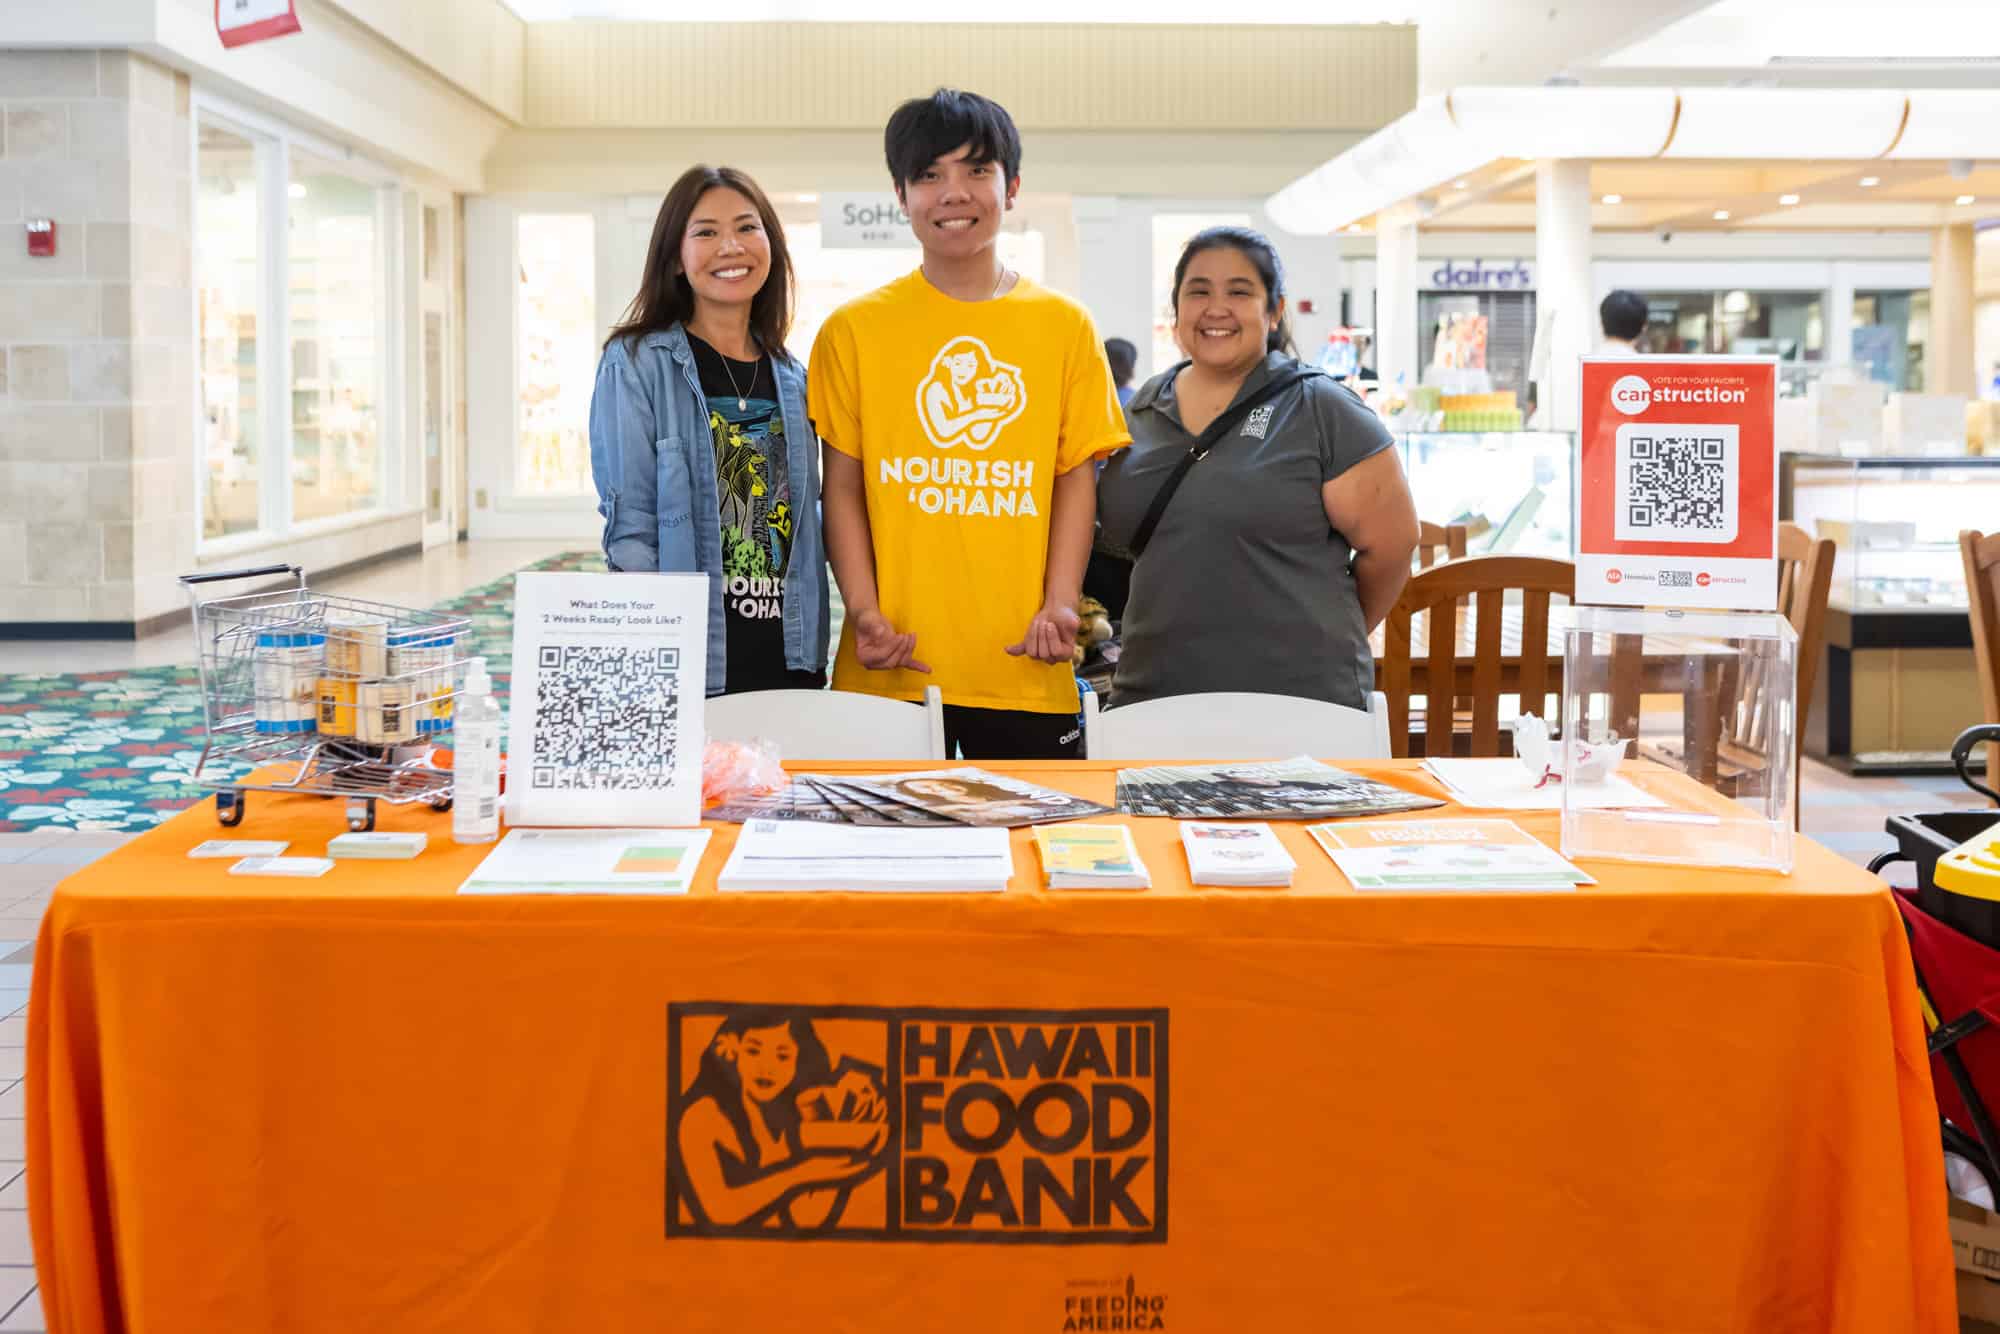 Our partners and event beneficiaries, Hawai‘i Foodbank